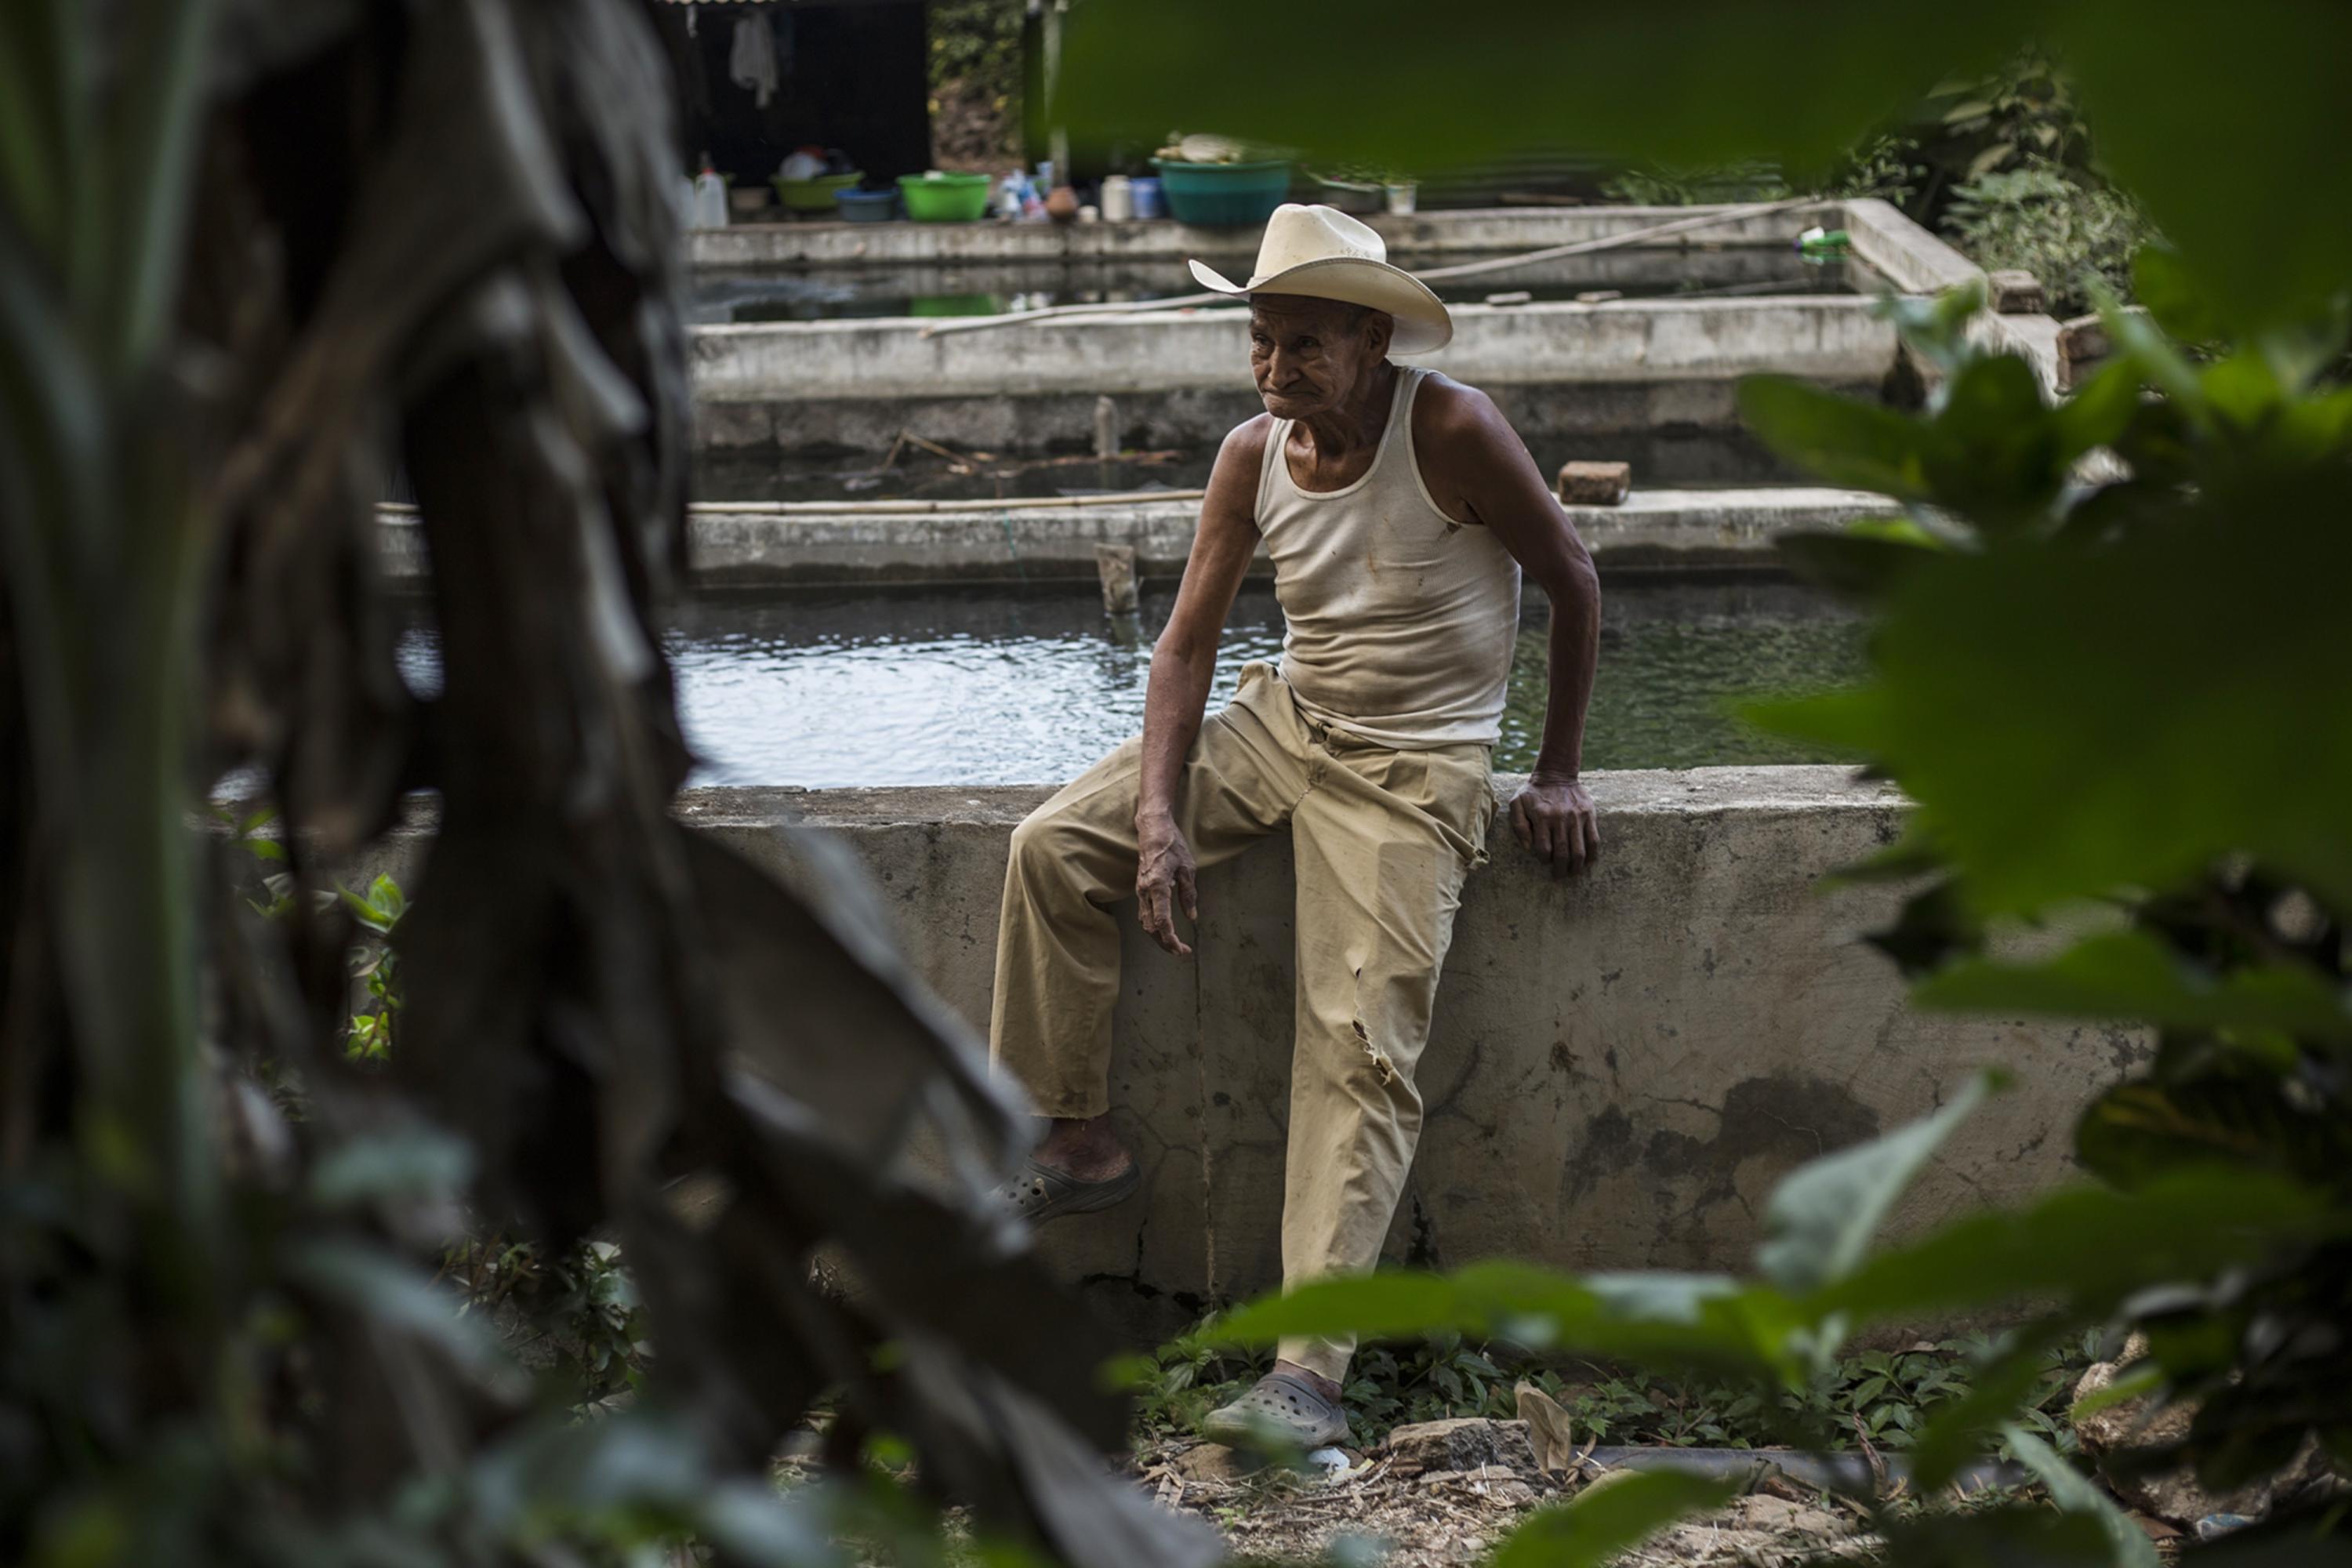 Antolino Artero, 82, helps his daughter to farm tilapia. Every three months they produce around 200 pounds for their own consumption. Another 17 families also engage in this farming, which does not produce any surplus for sale. “We enjoy the water here. If they take it away, we will be forced to buy it by the jug. We see that President Bukele is busy at work, so we ask him to pay attention to this attempted theft from the community,” he says.